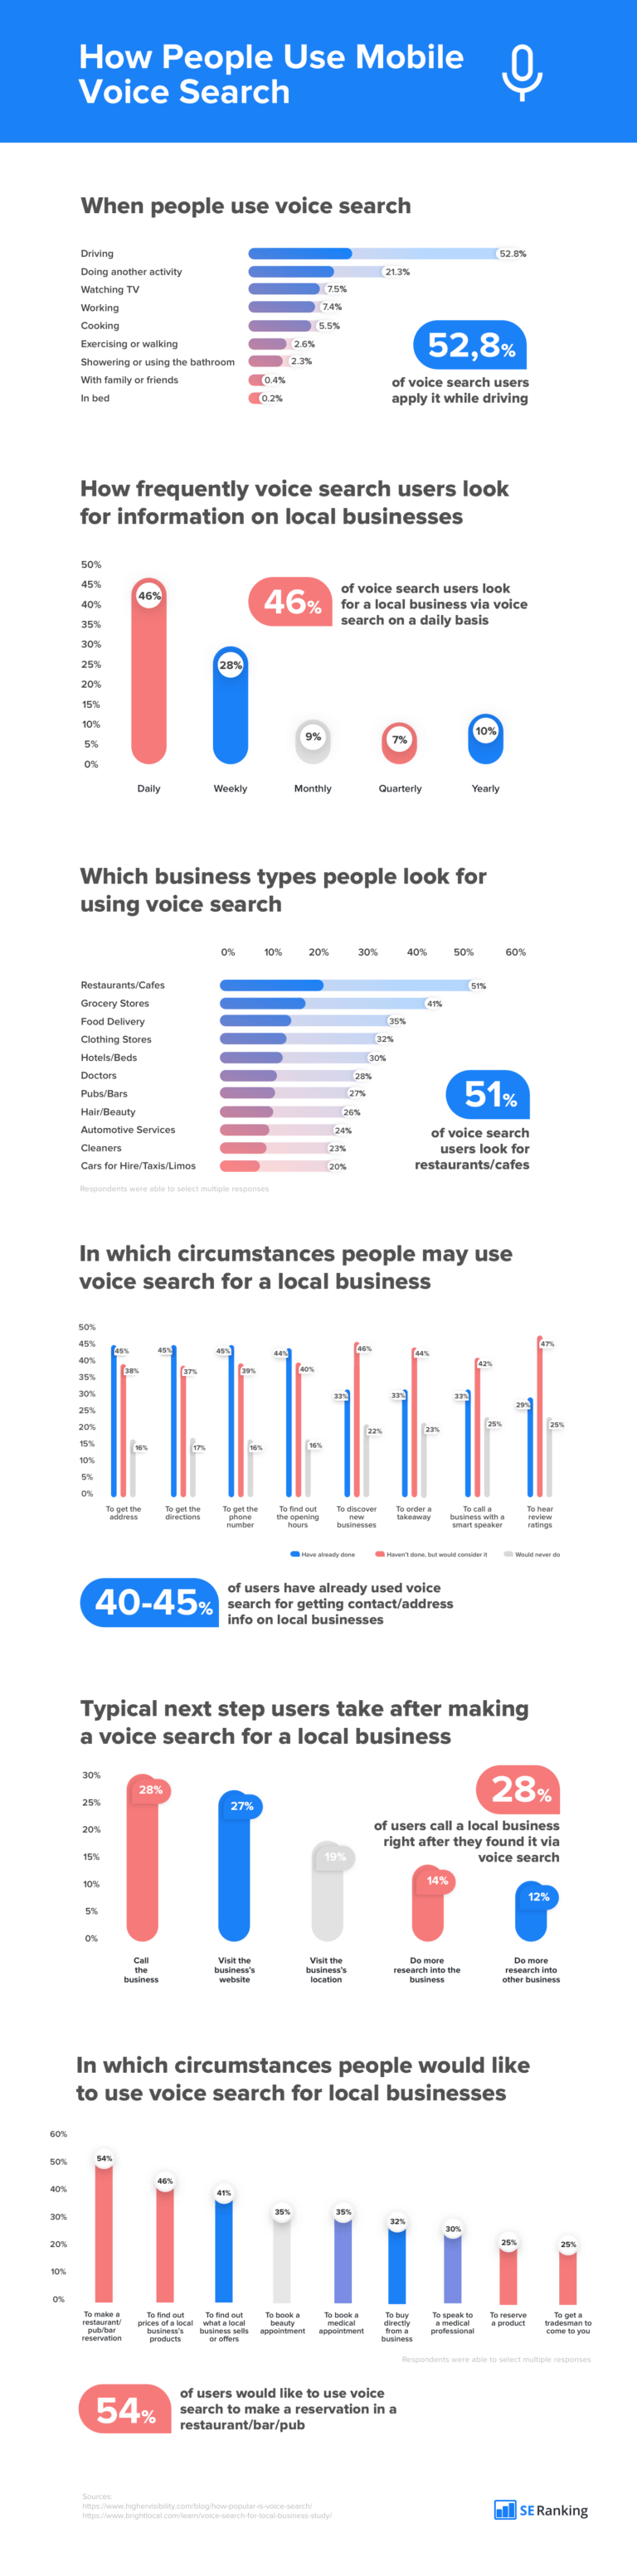 How-People-Use-Mobile-Voice-Search